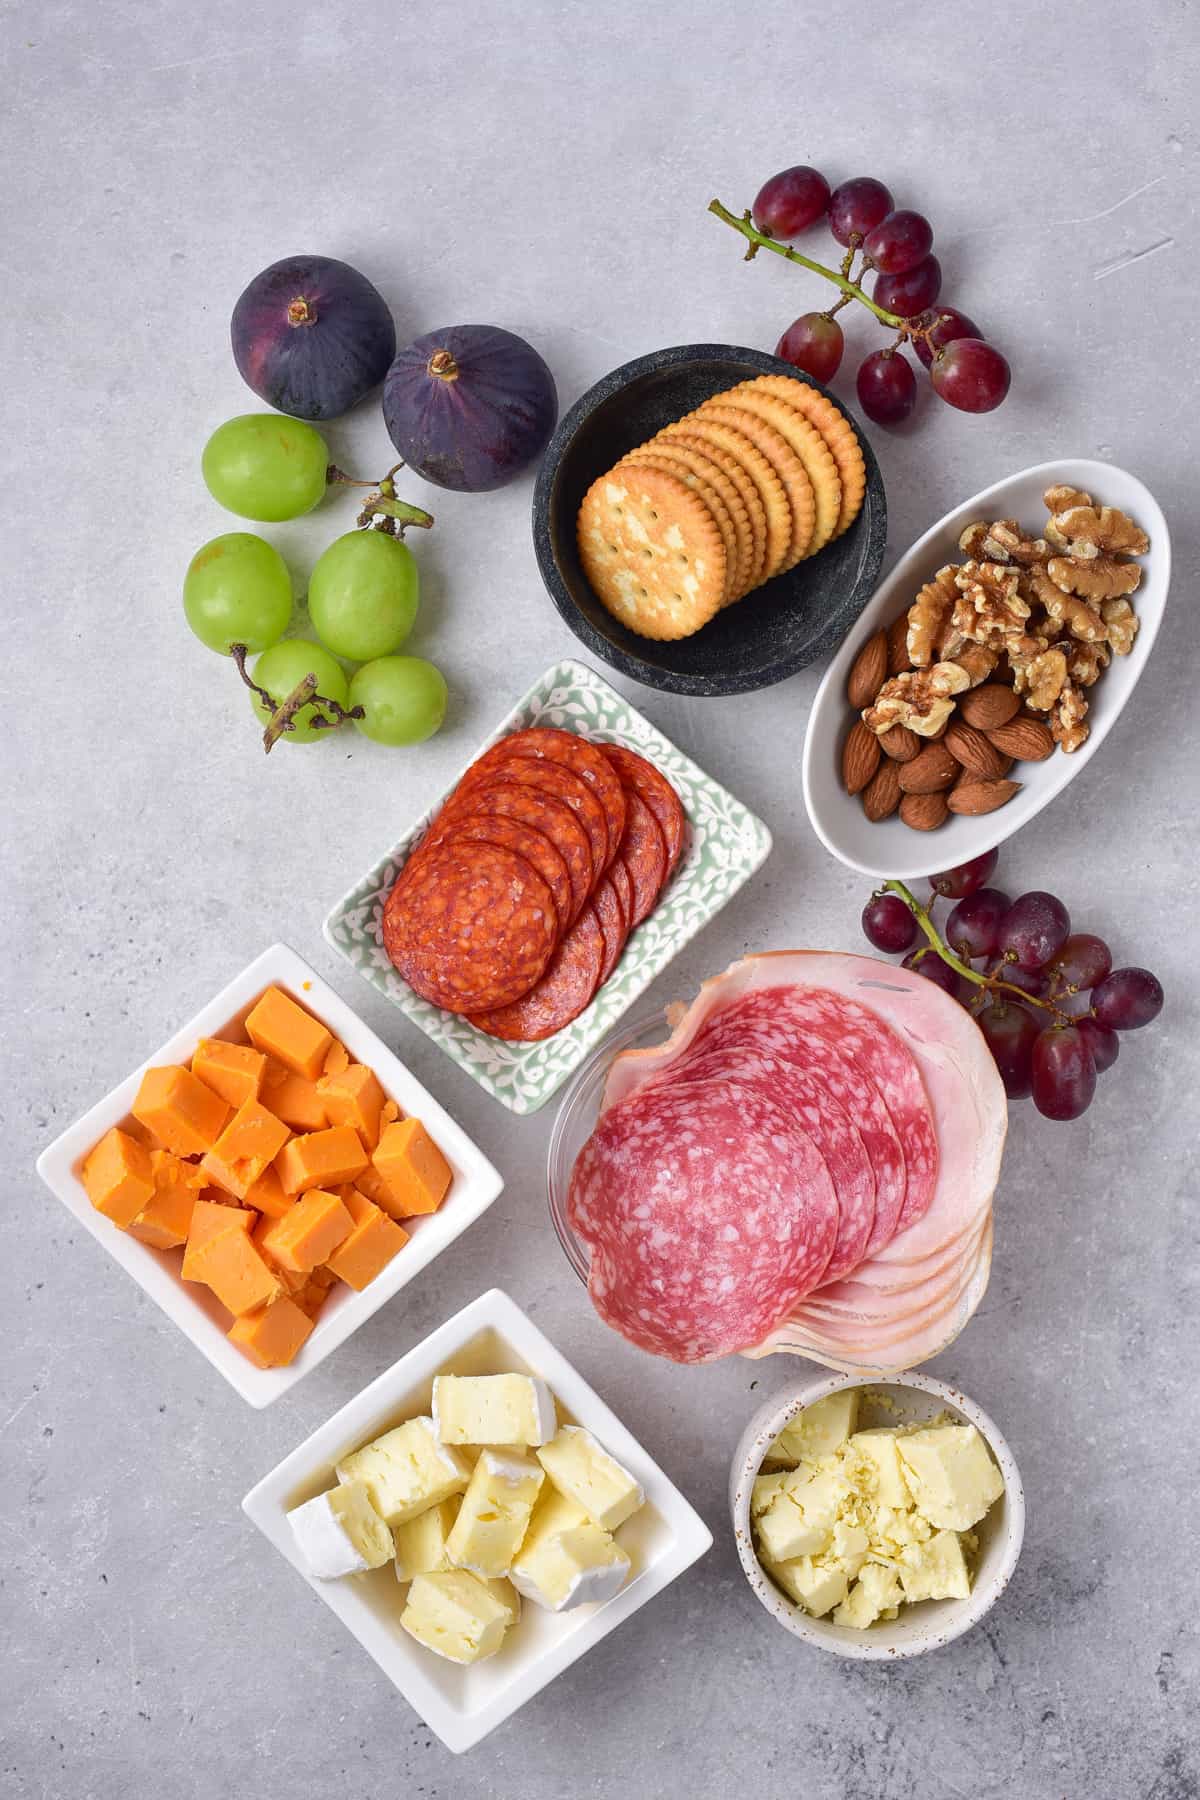 Ingredients for a meat and cheese tray.